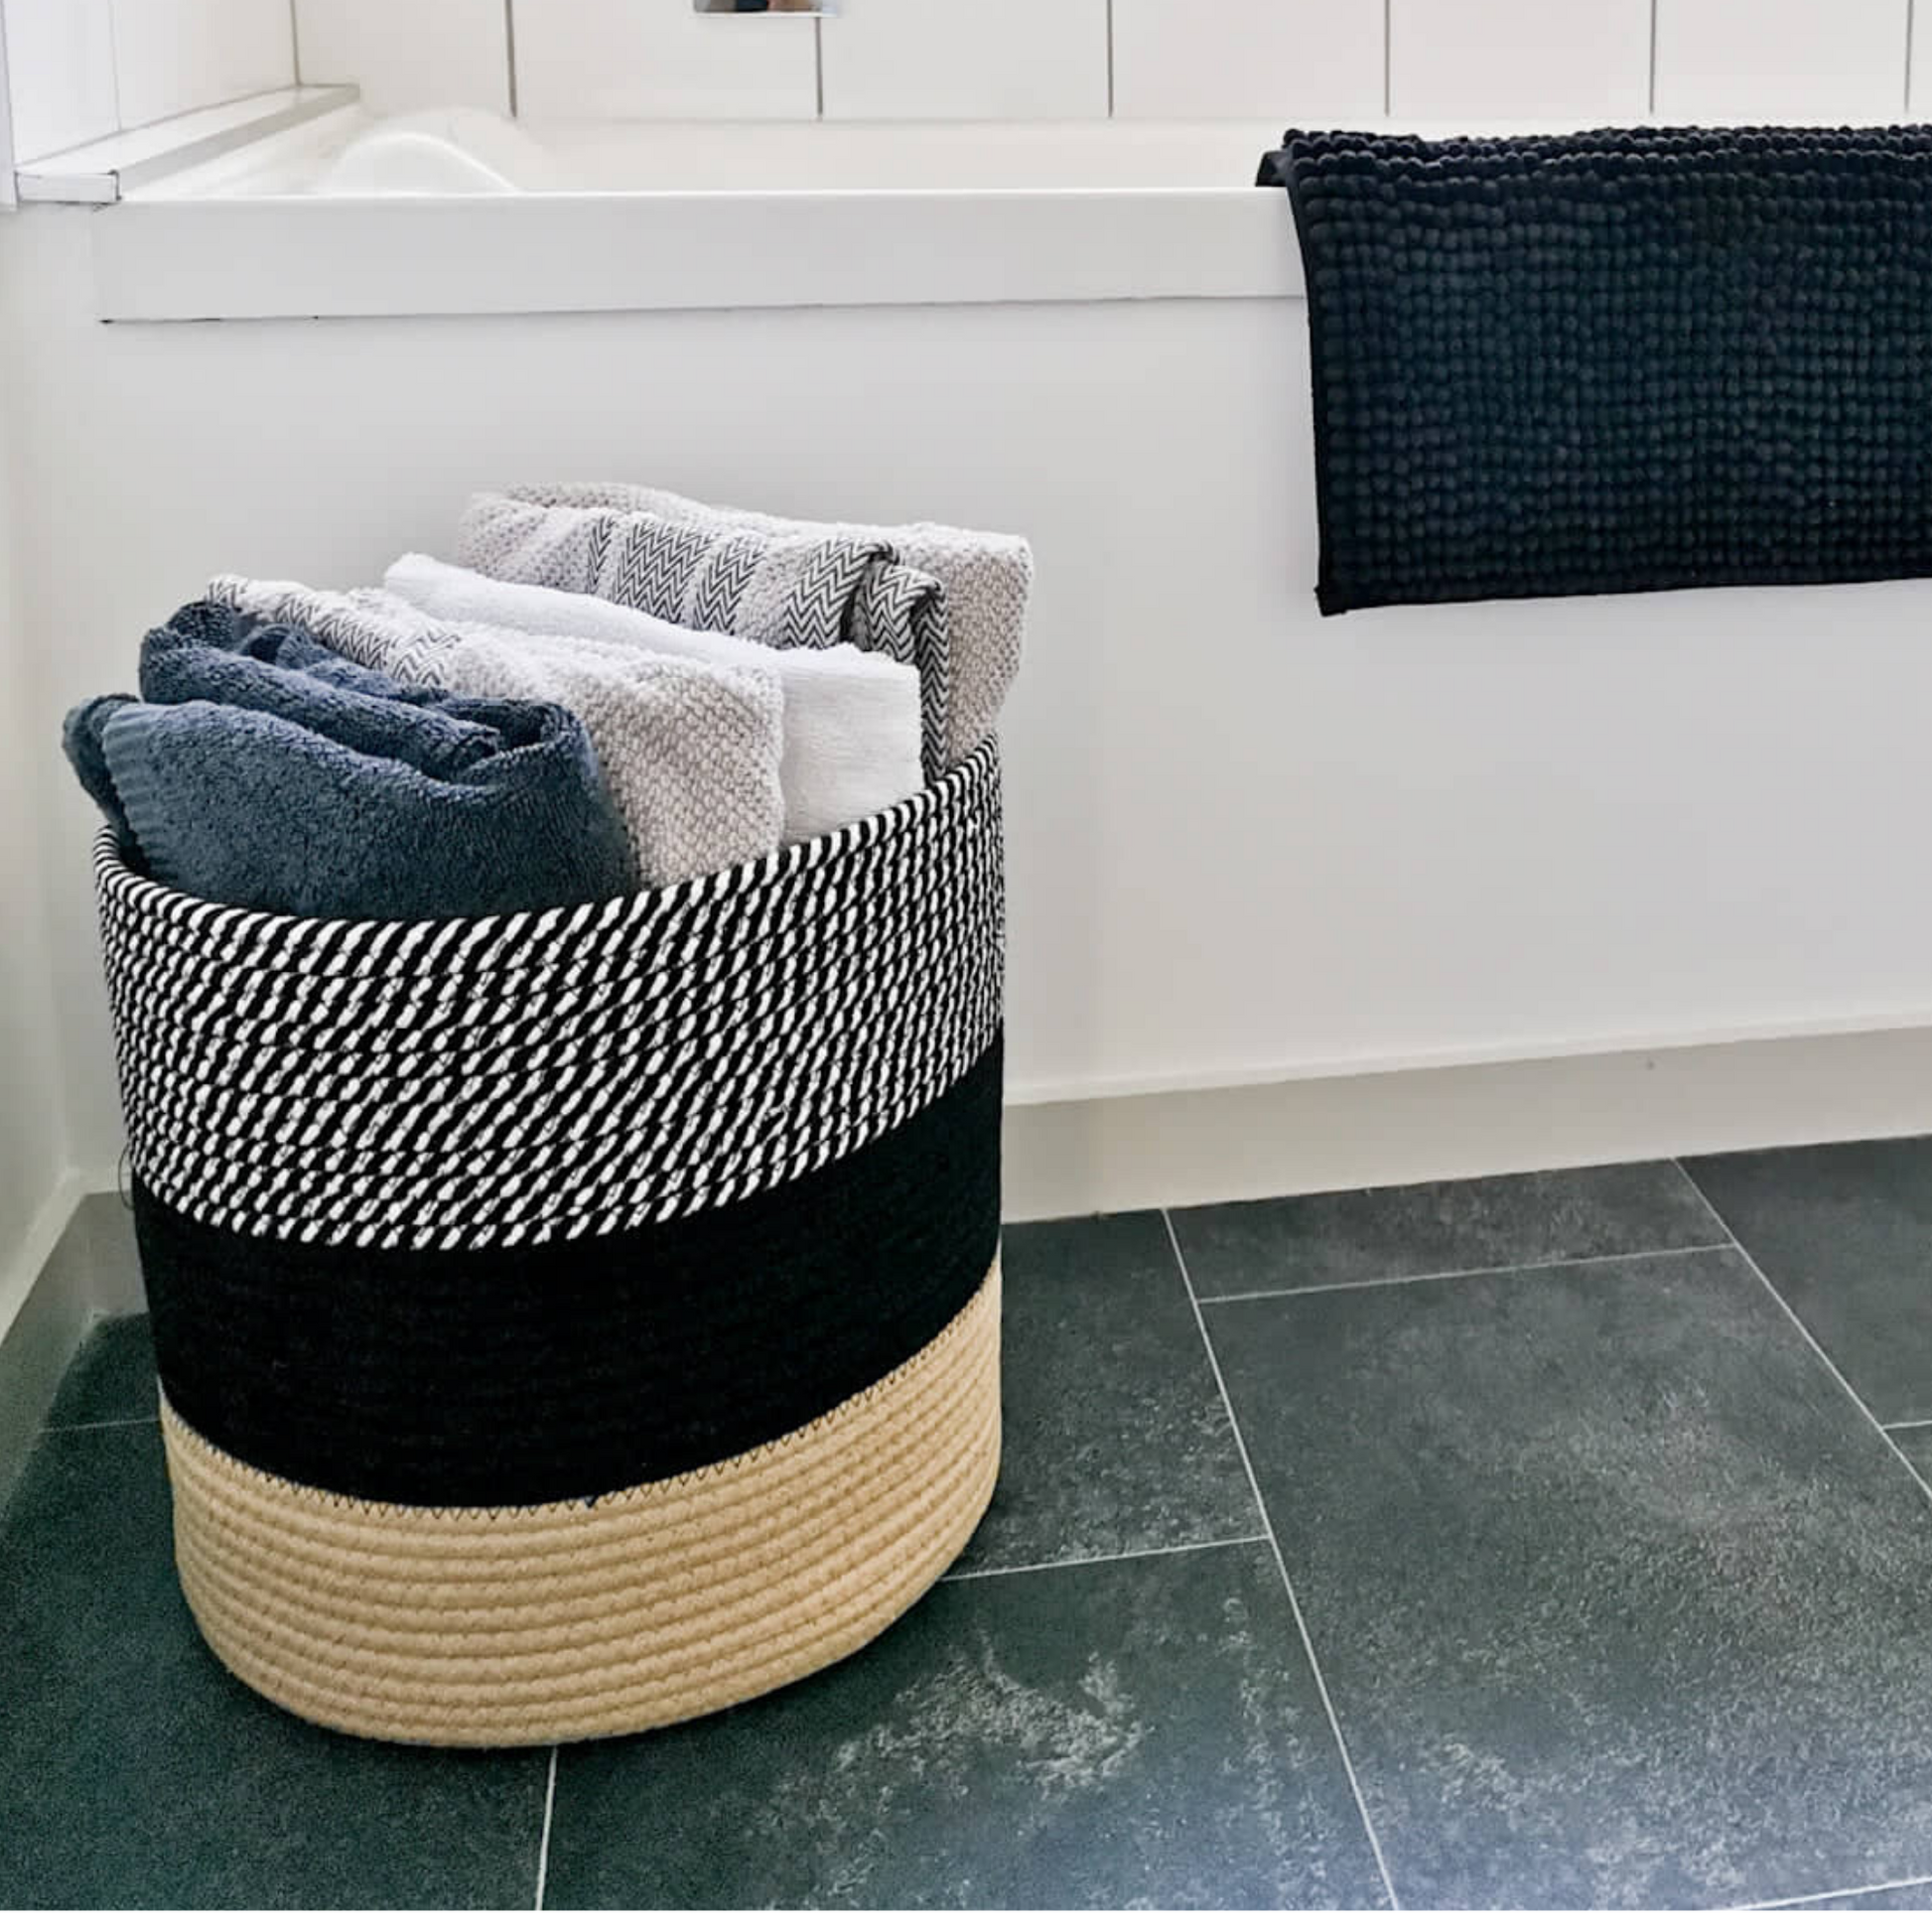 Black and white cotton rope basket for storing laundry, towels, pillows, rugs. Decorative and multi-functional jute basket.